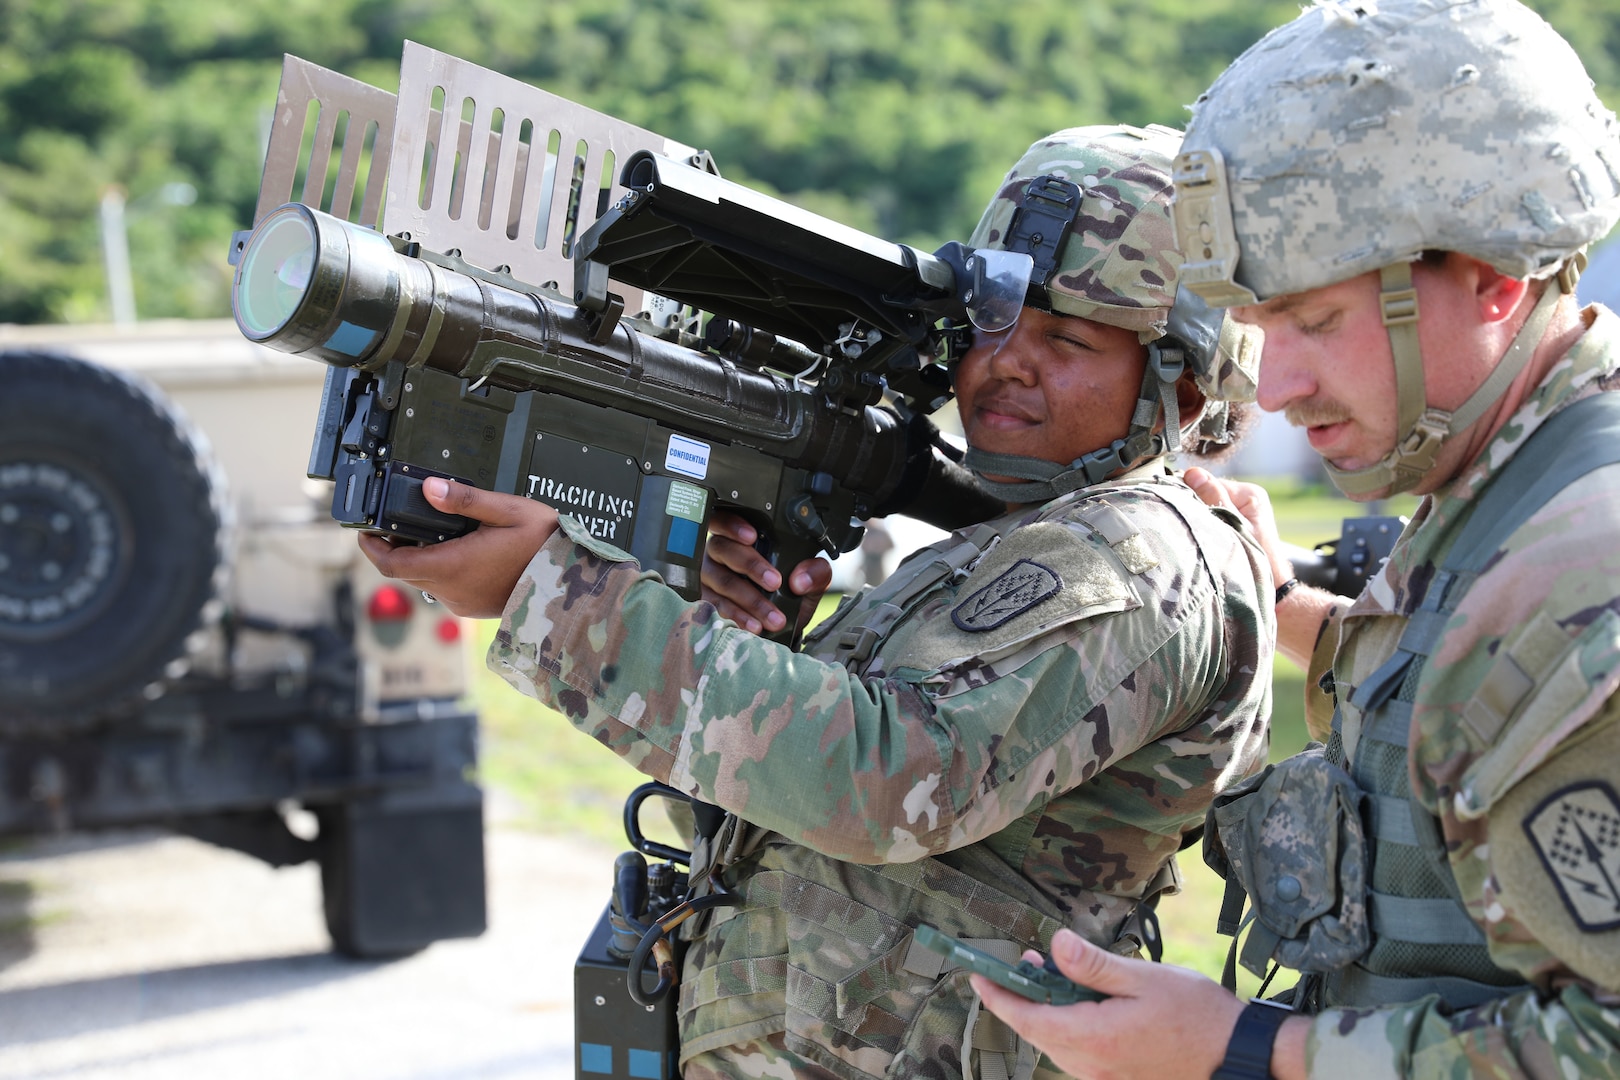 Ohio National Guard's Spc. Kiya Marshall and Staff Sgt. Tyler Hamilton, assigned to Alpha Battery, 1st Battalion, 174th Air Defense Artillery Regiment, operate a man-portable air-defense system to engage an enemy aircraft during exercise Forager 21 July 30, 2021, at Andersen Air Force Base, Guam. The Avenger is a self-propelled surface-to-air missile system that provides mobile, short-range air defense protection for ground units.